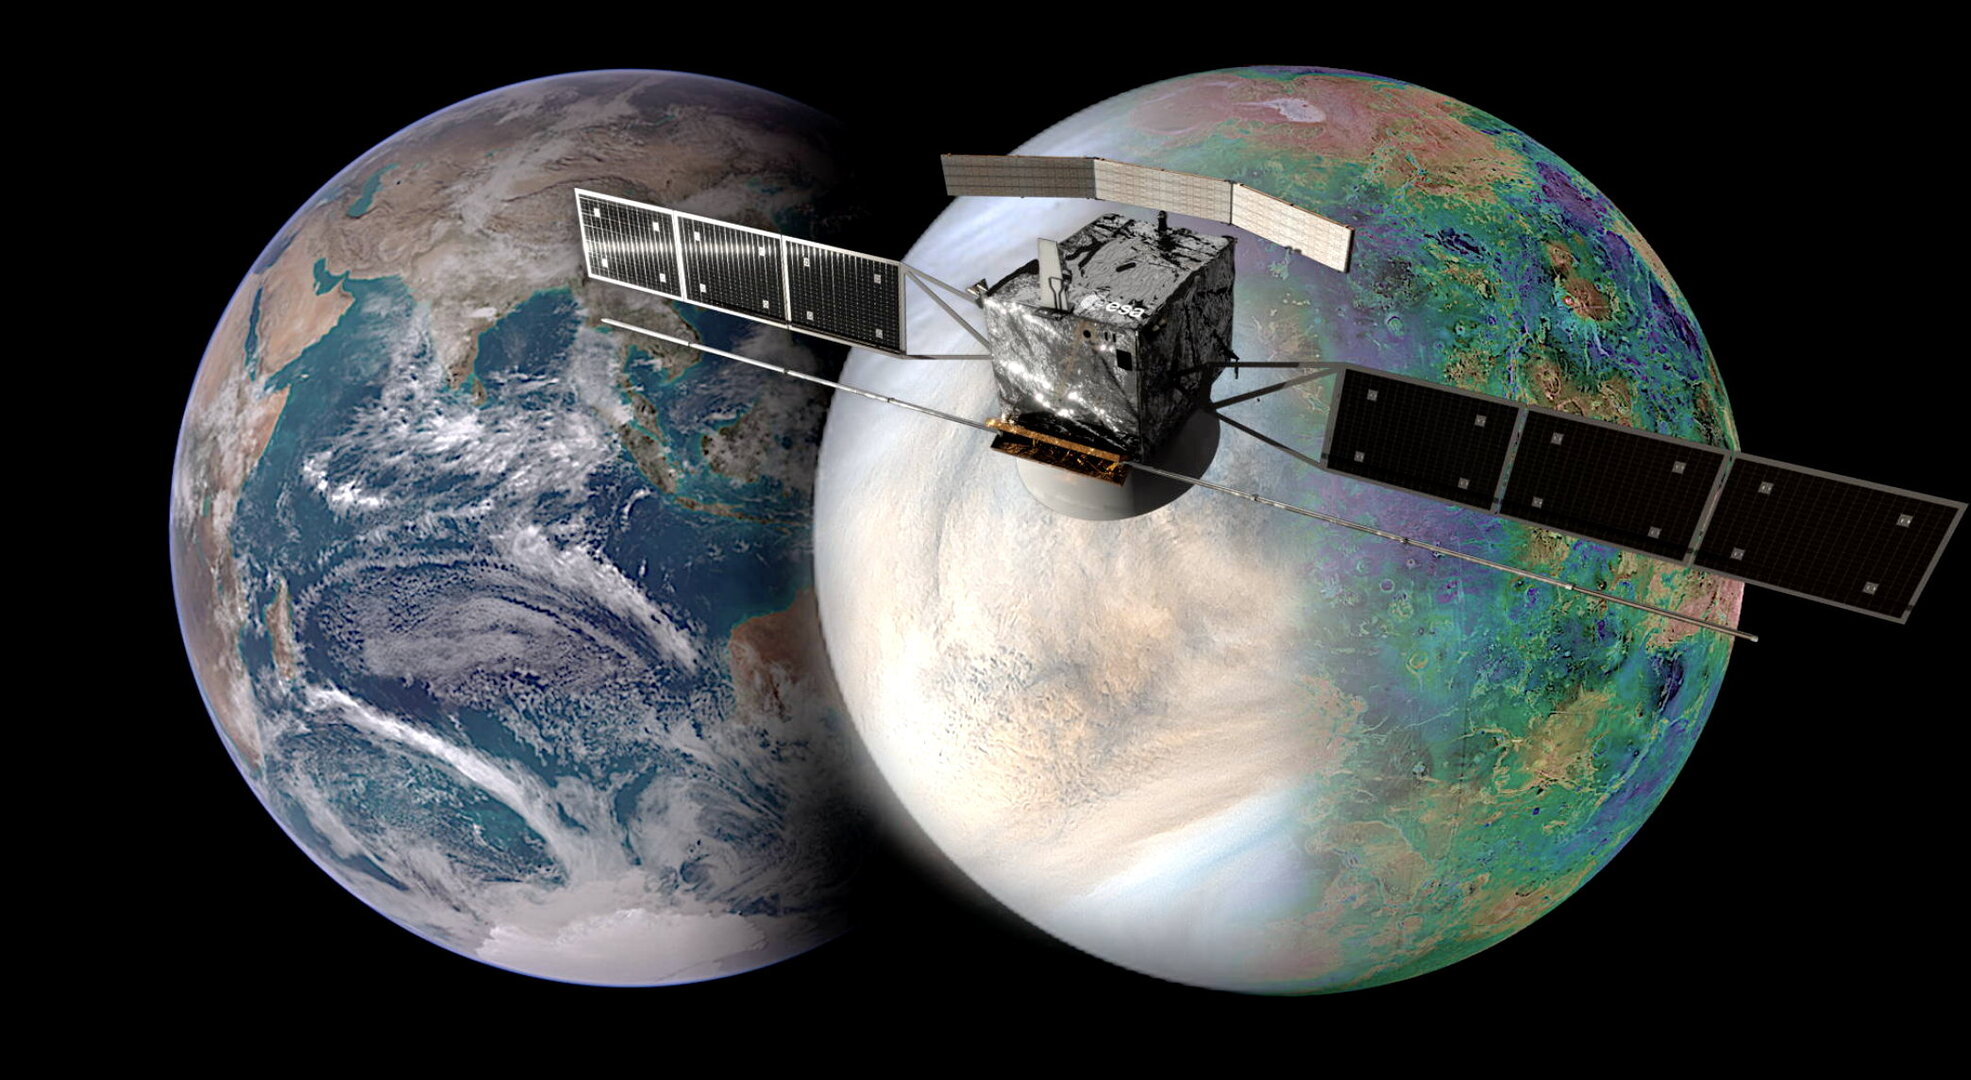 ESA To Launch Venus Mission EnVision in 2031